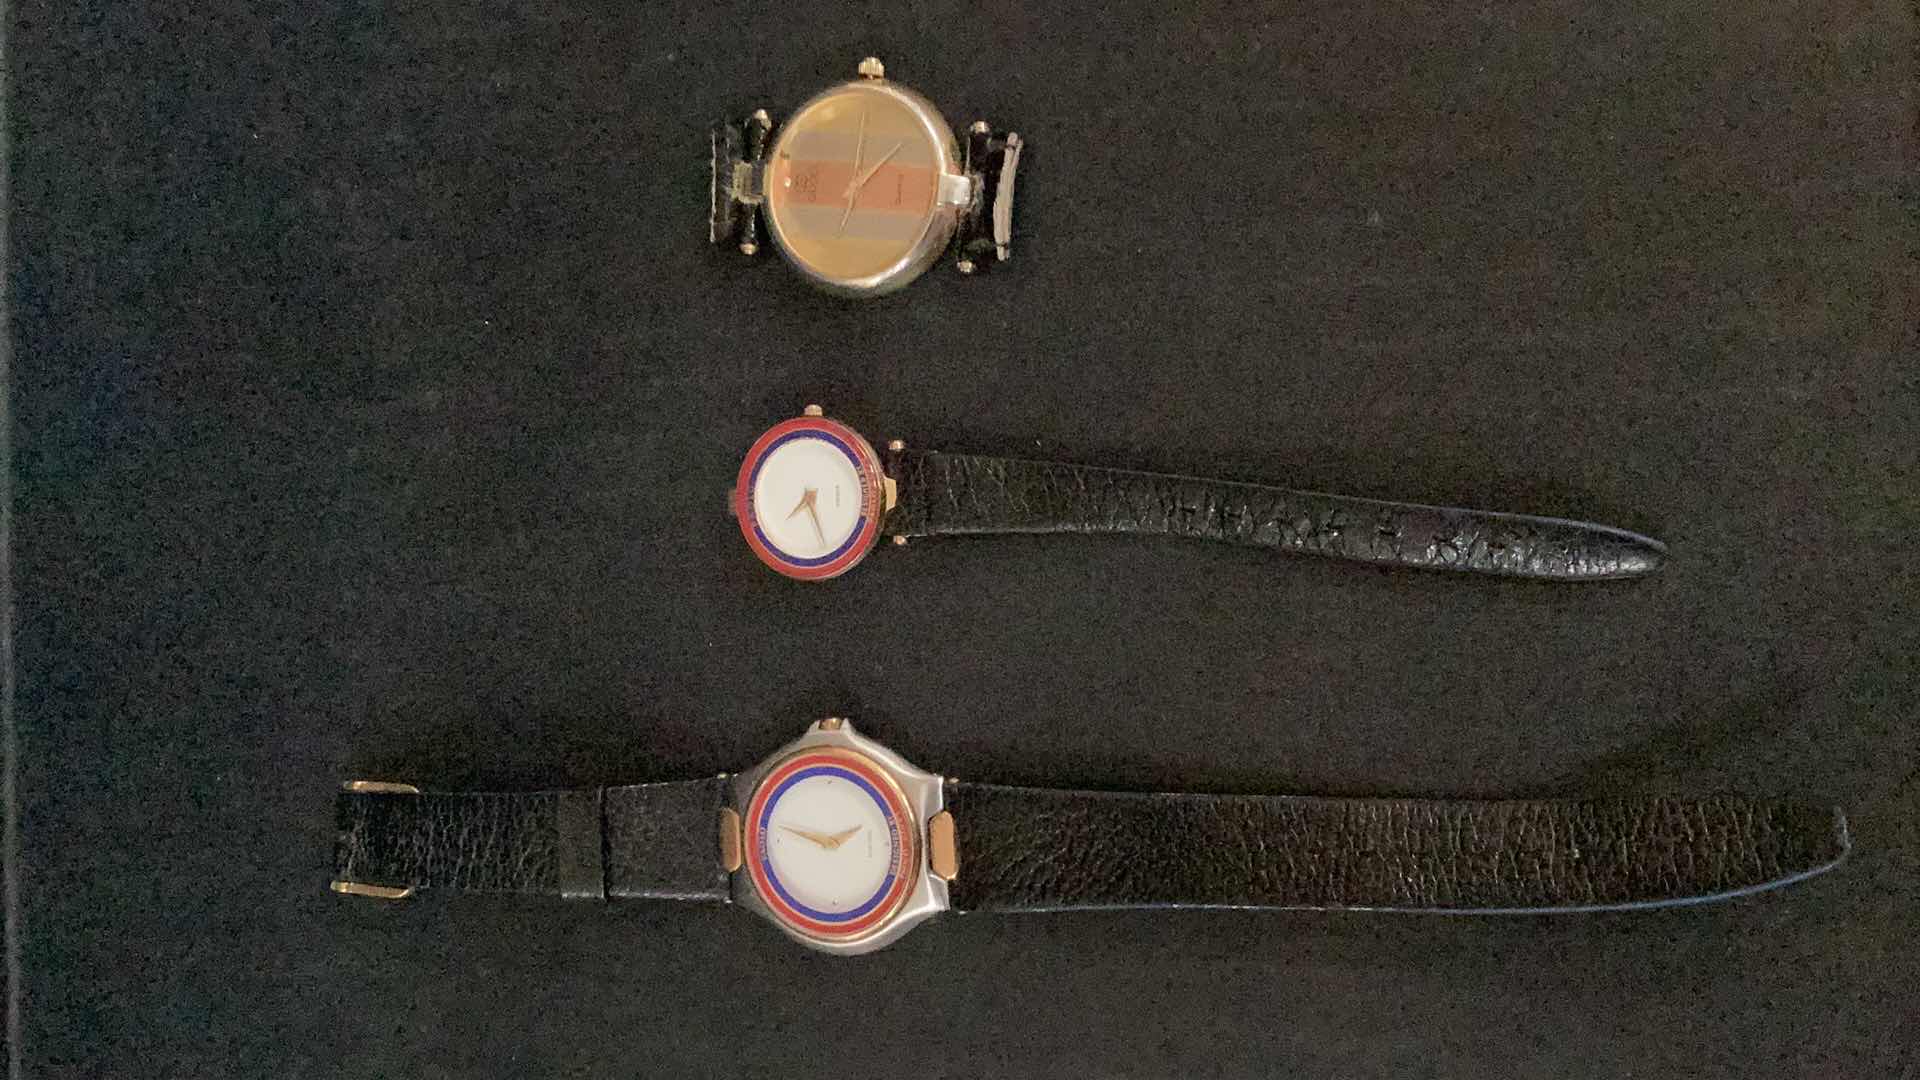 Photo 1 of 2 PAOLA GUCCI AND 1 GUCCI WATCH